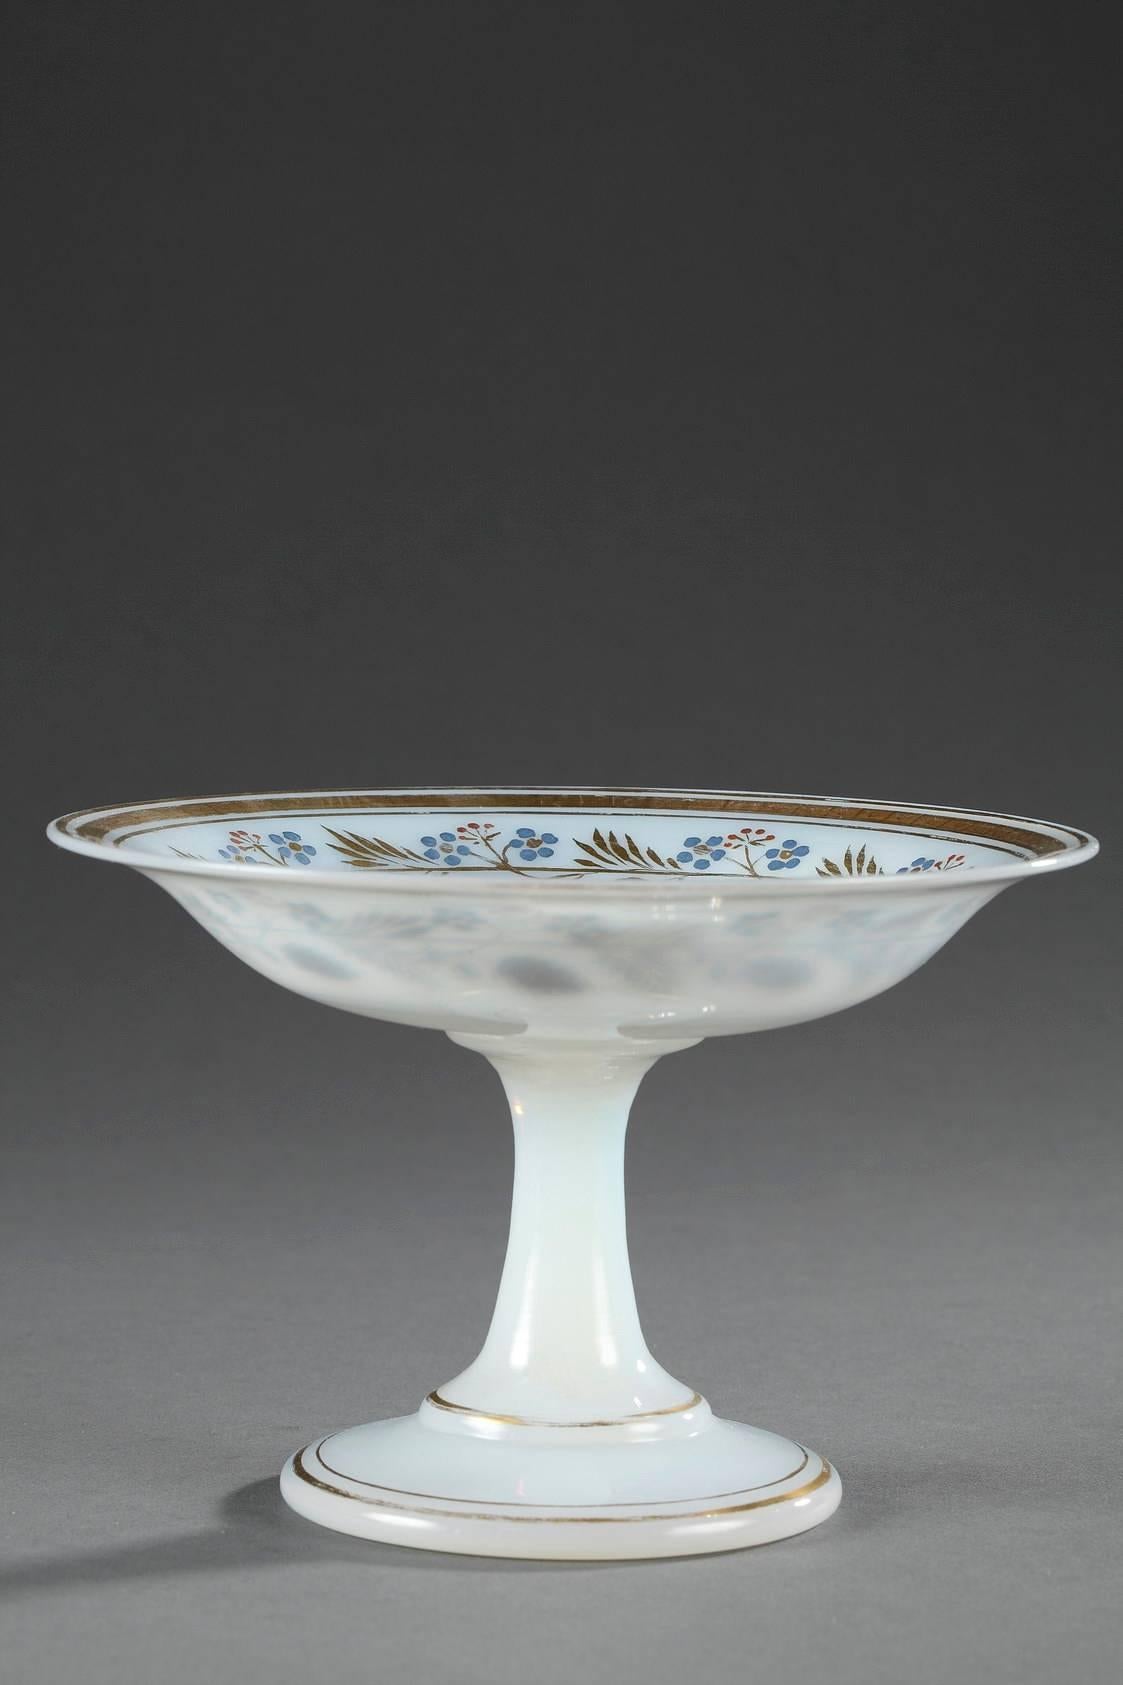 White Opaline crystal cup on a raised foot accented with gilt stripes. A gilded and multicolored ring of anemones and forget-me-nots adorns the interior of the cup, and floral pattern marks its center. The piece was produced by the Jean-Baptiste